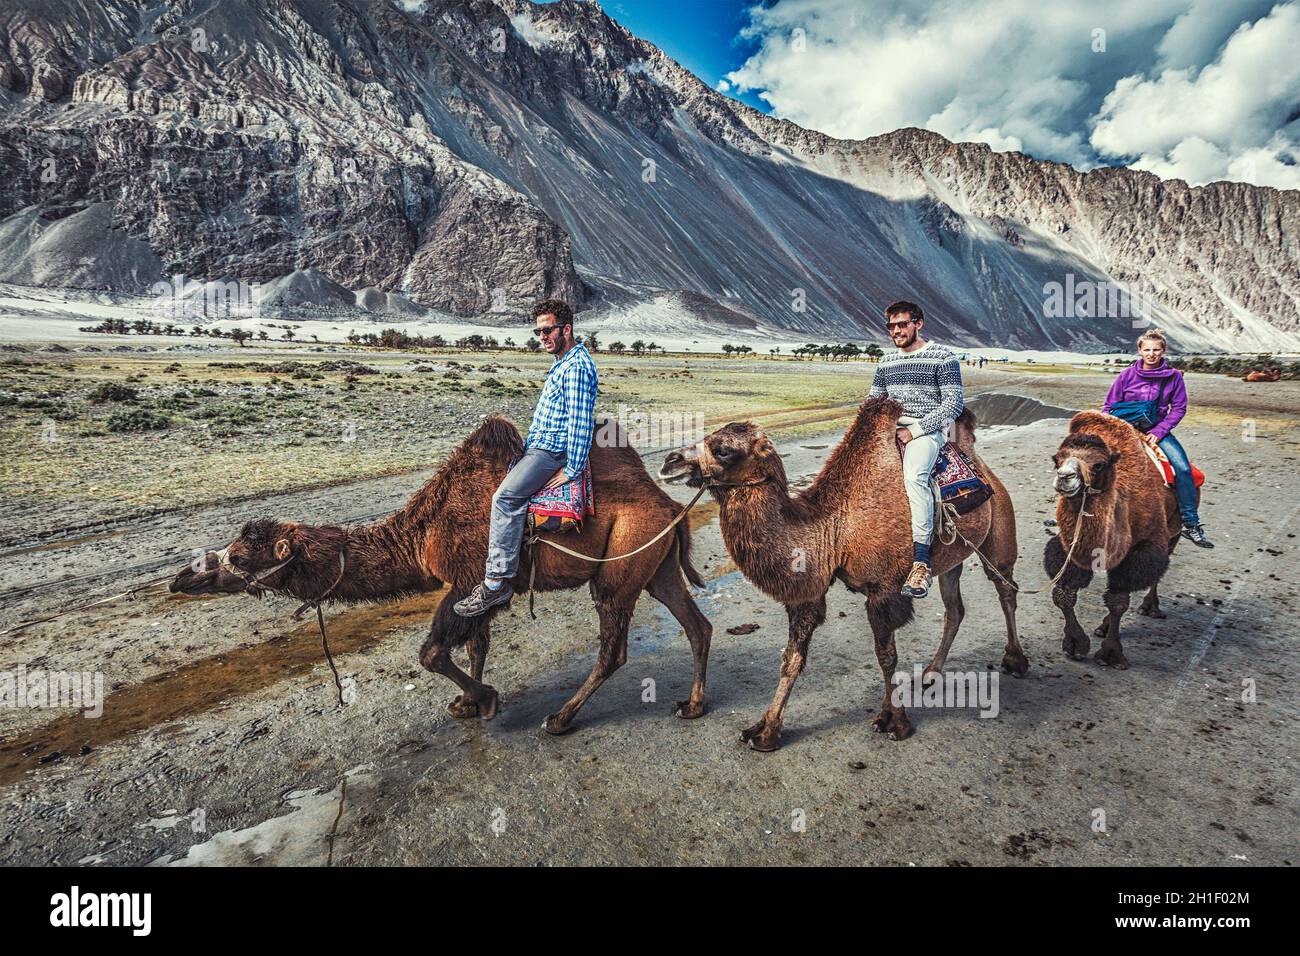 HUNDER, INDIA - SEPTEMBER 11, 2012: Western tourists riding camels in Nubra valley in Himalayas, Ladakh Stock Photo